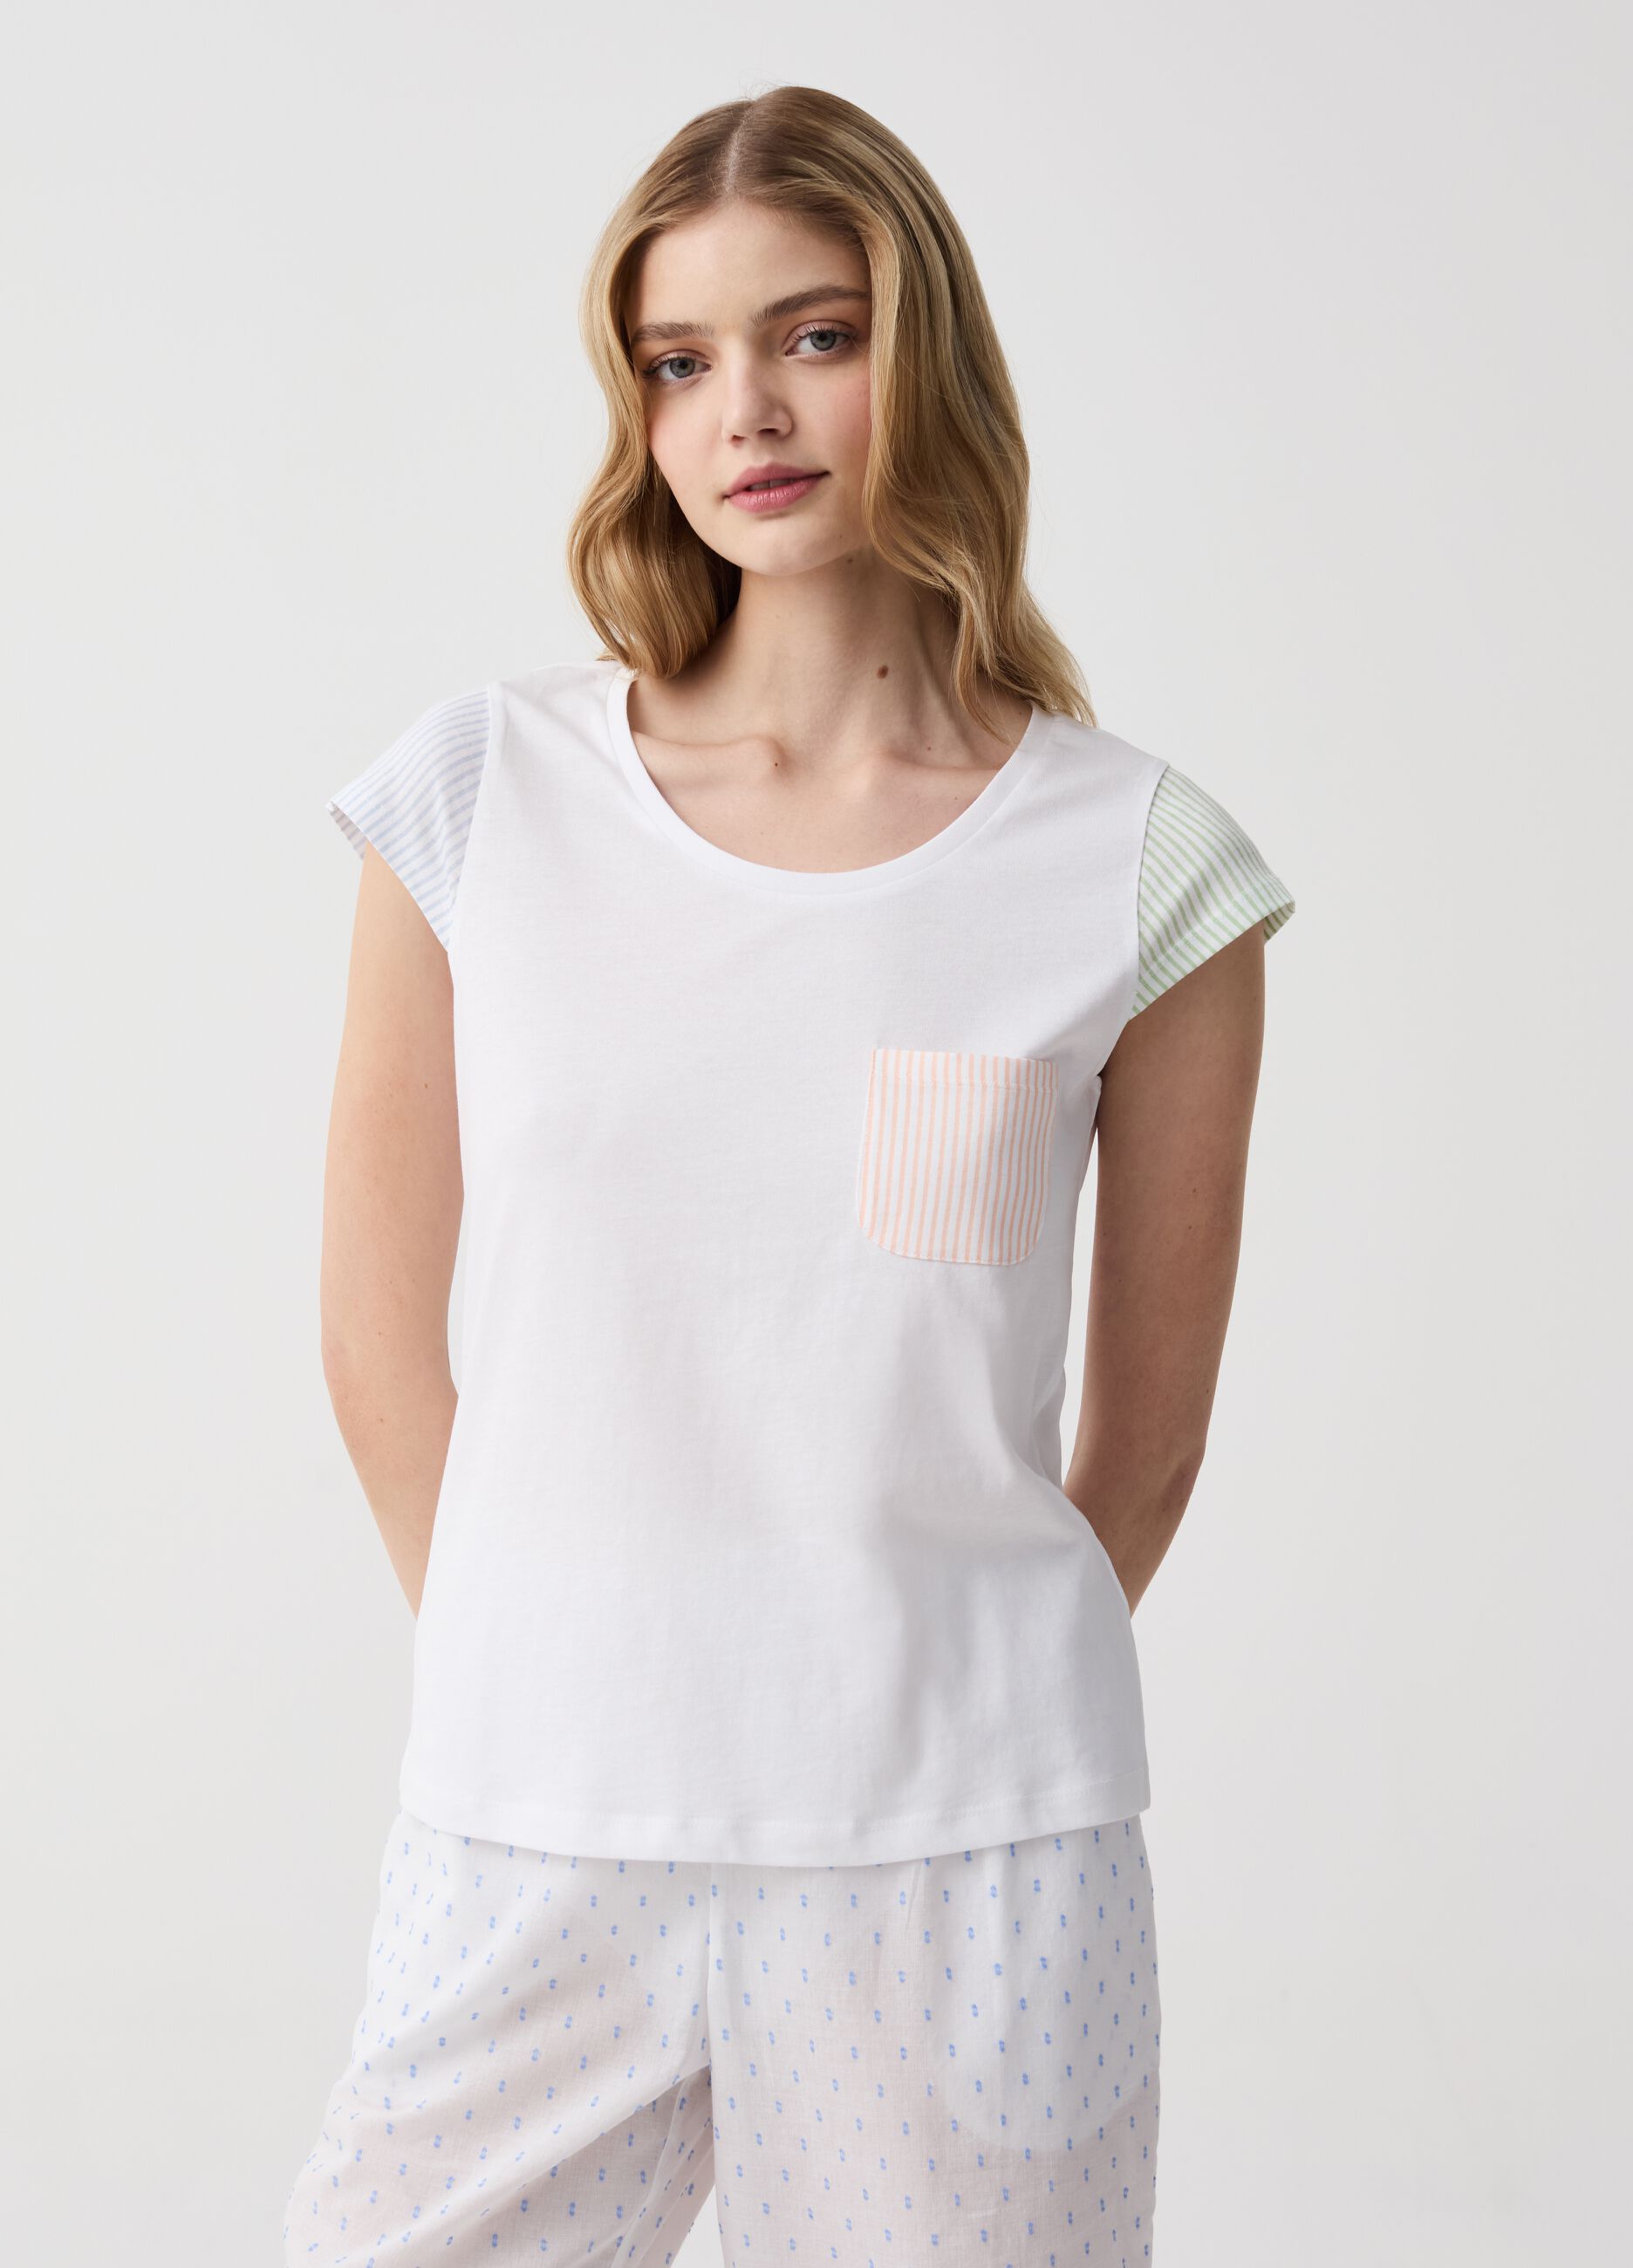 Pyjama top with sleeves and striped pocket